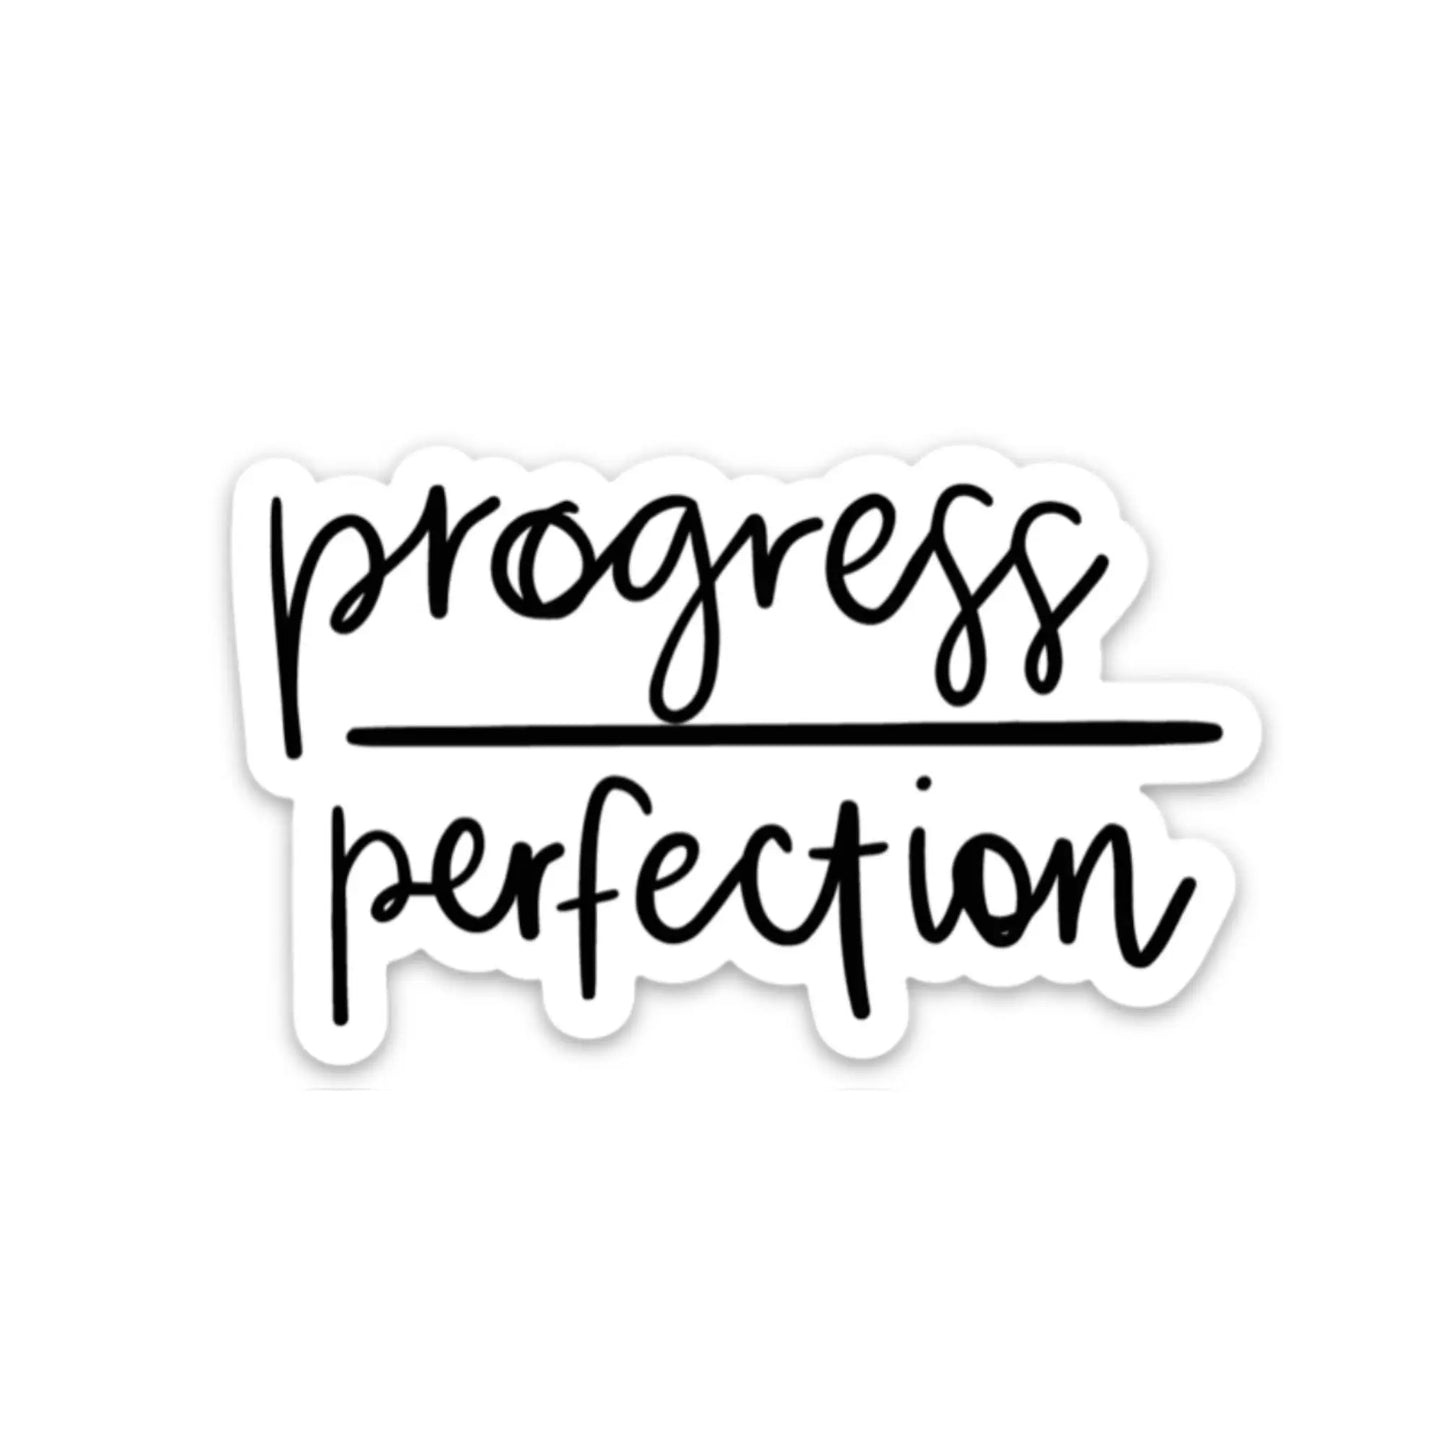 Inspirational magnet | Progress over perfection magnet Edith Chloe Self-Care Shop